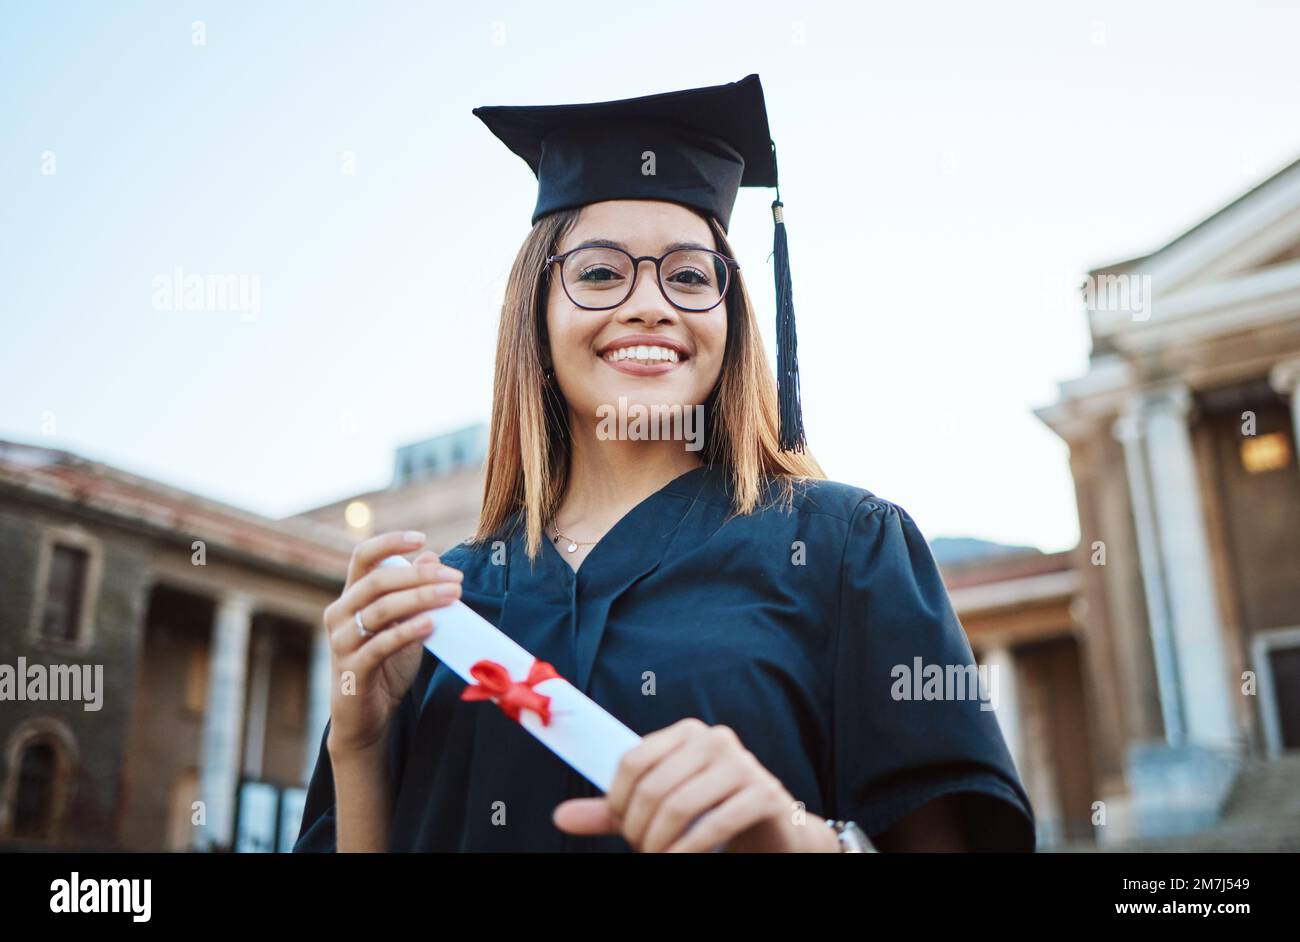 Portrait, graduate and study with a student woman holding a diploma or certificate outdoor on graduation day. Education, goal or unviersity with a Stock Photo